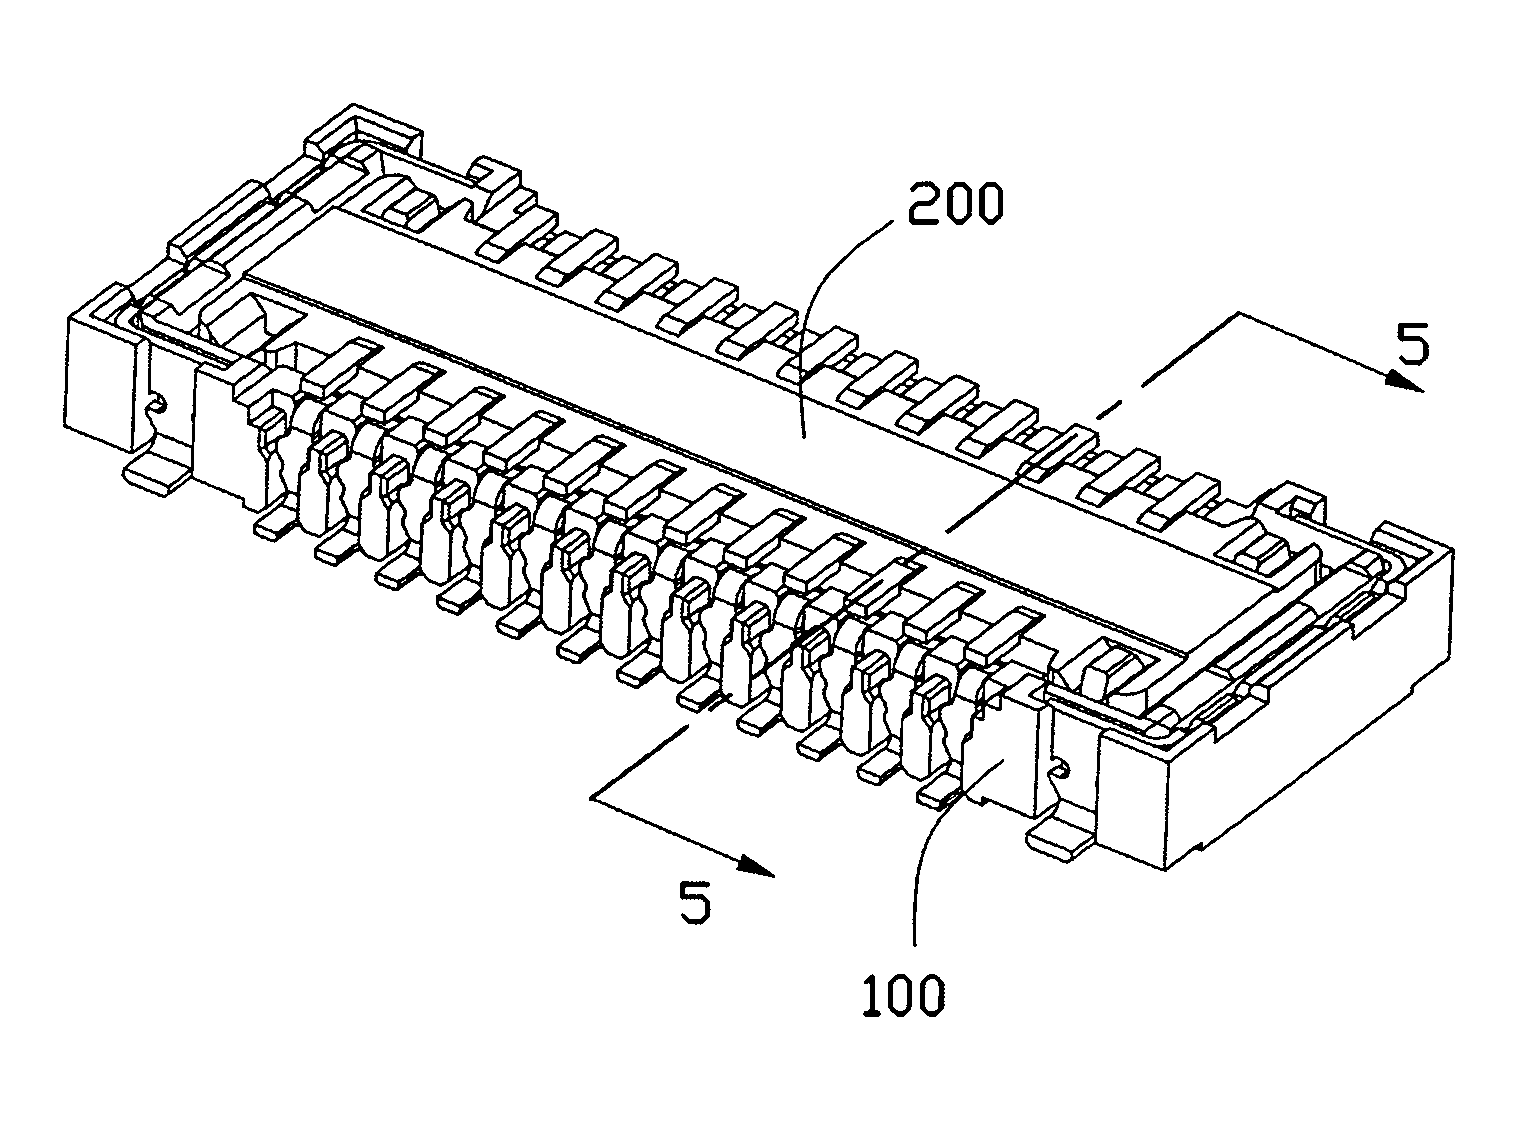 Electrical connector with improved housing background of the invention